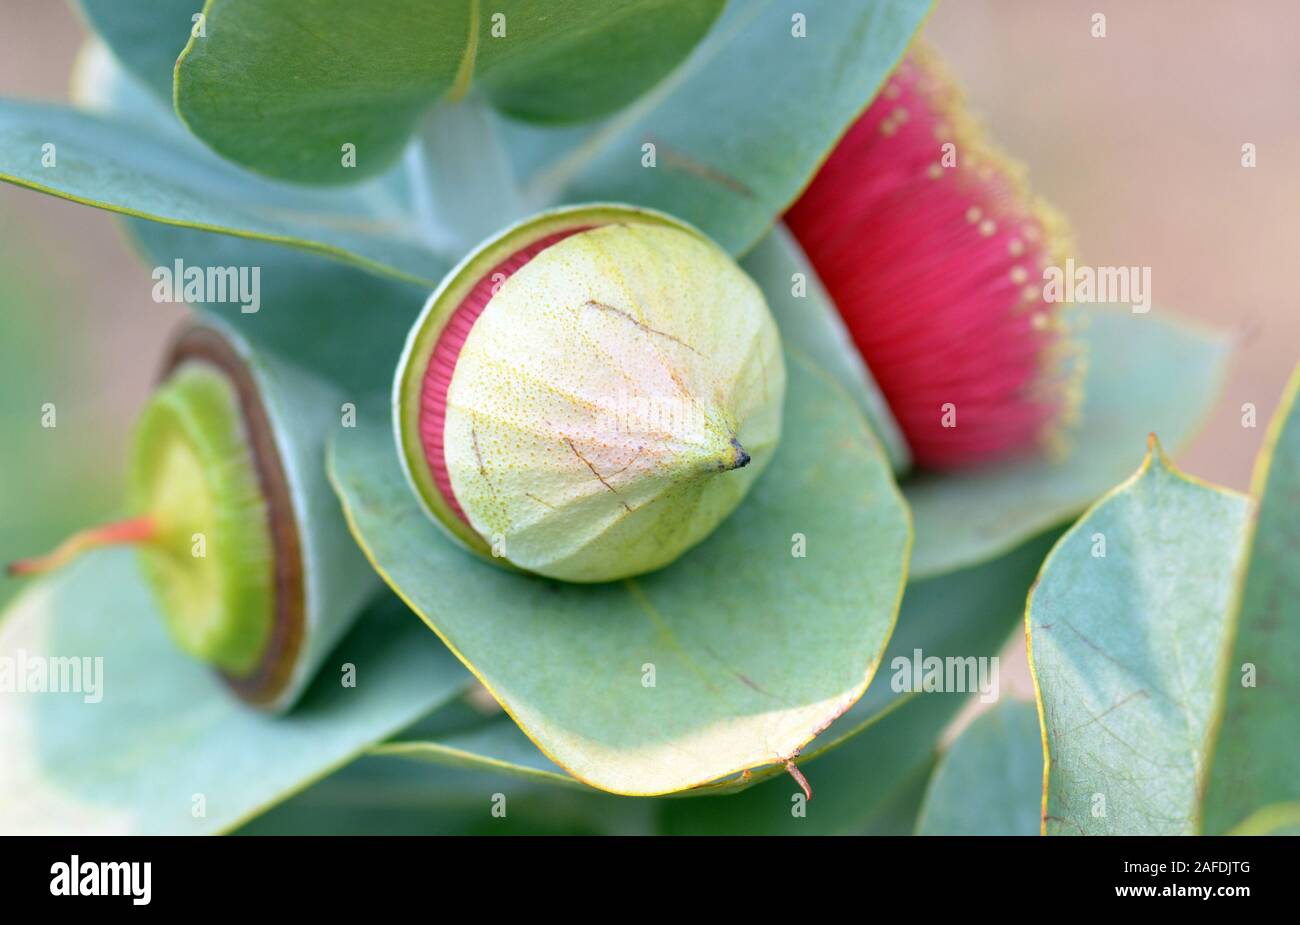 Large red blossom, bud, fruit and blue green foliage of the Australian native Mottlecah, Eucalyptus macrocarpa, family Myrtaceae. Endemic to Western A Stock Photo